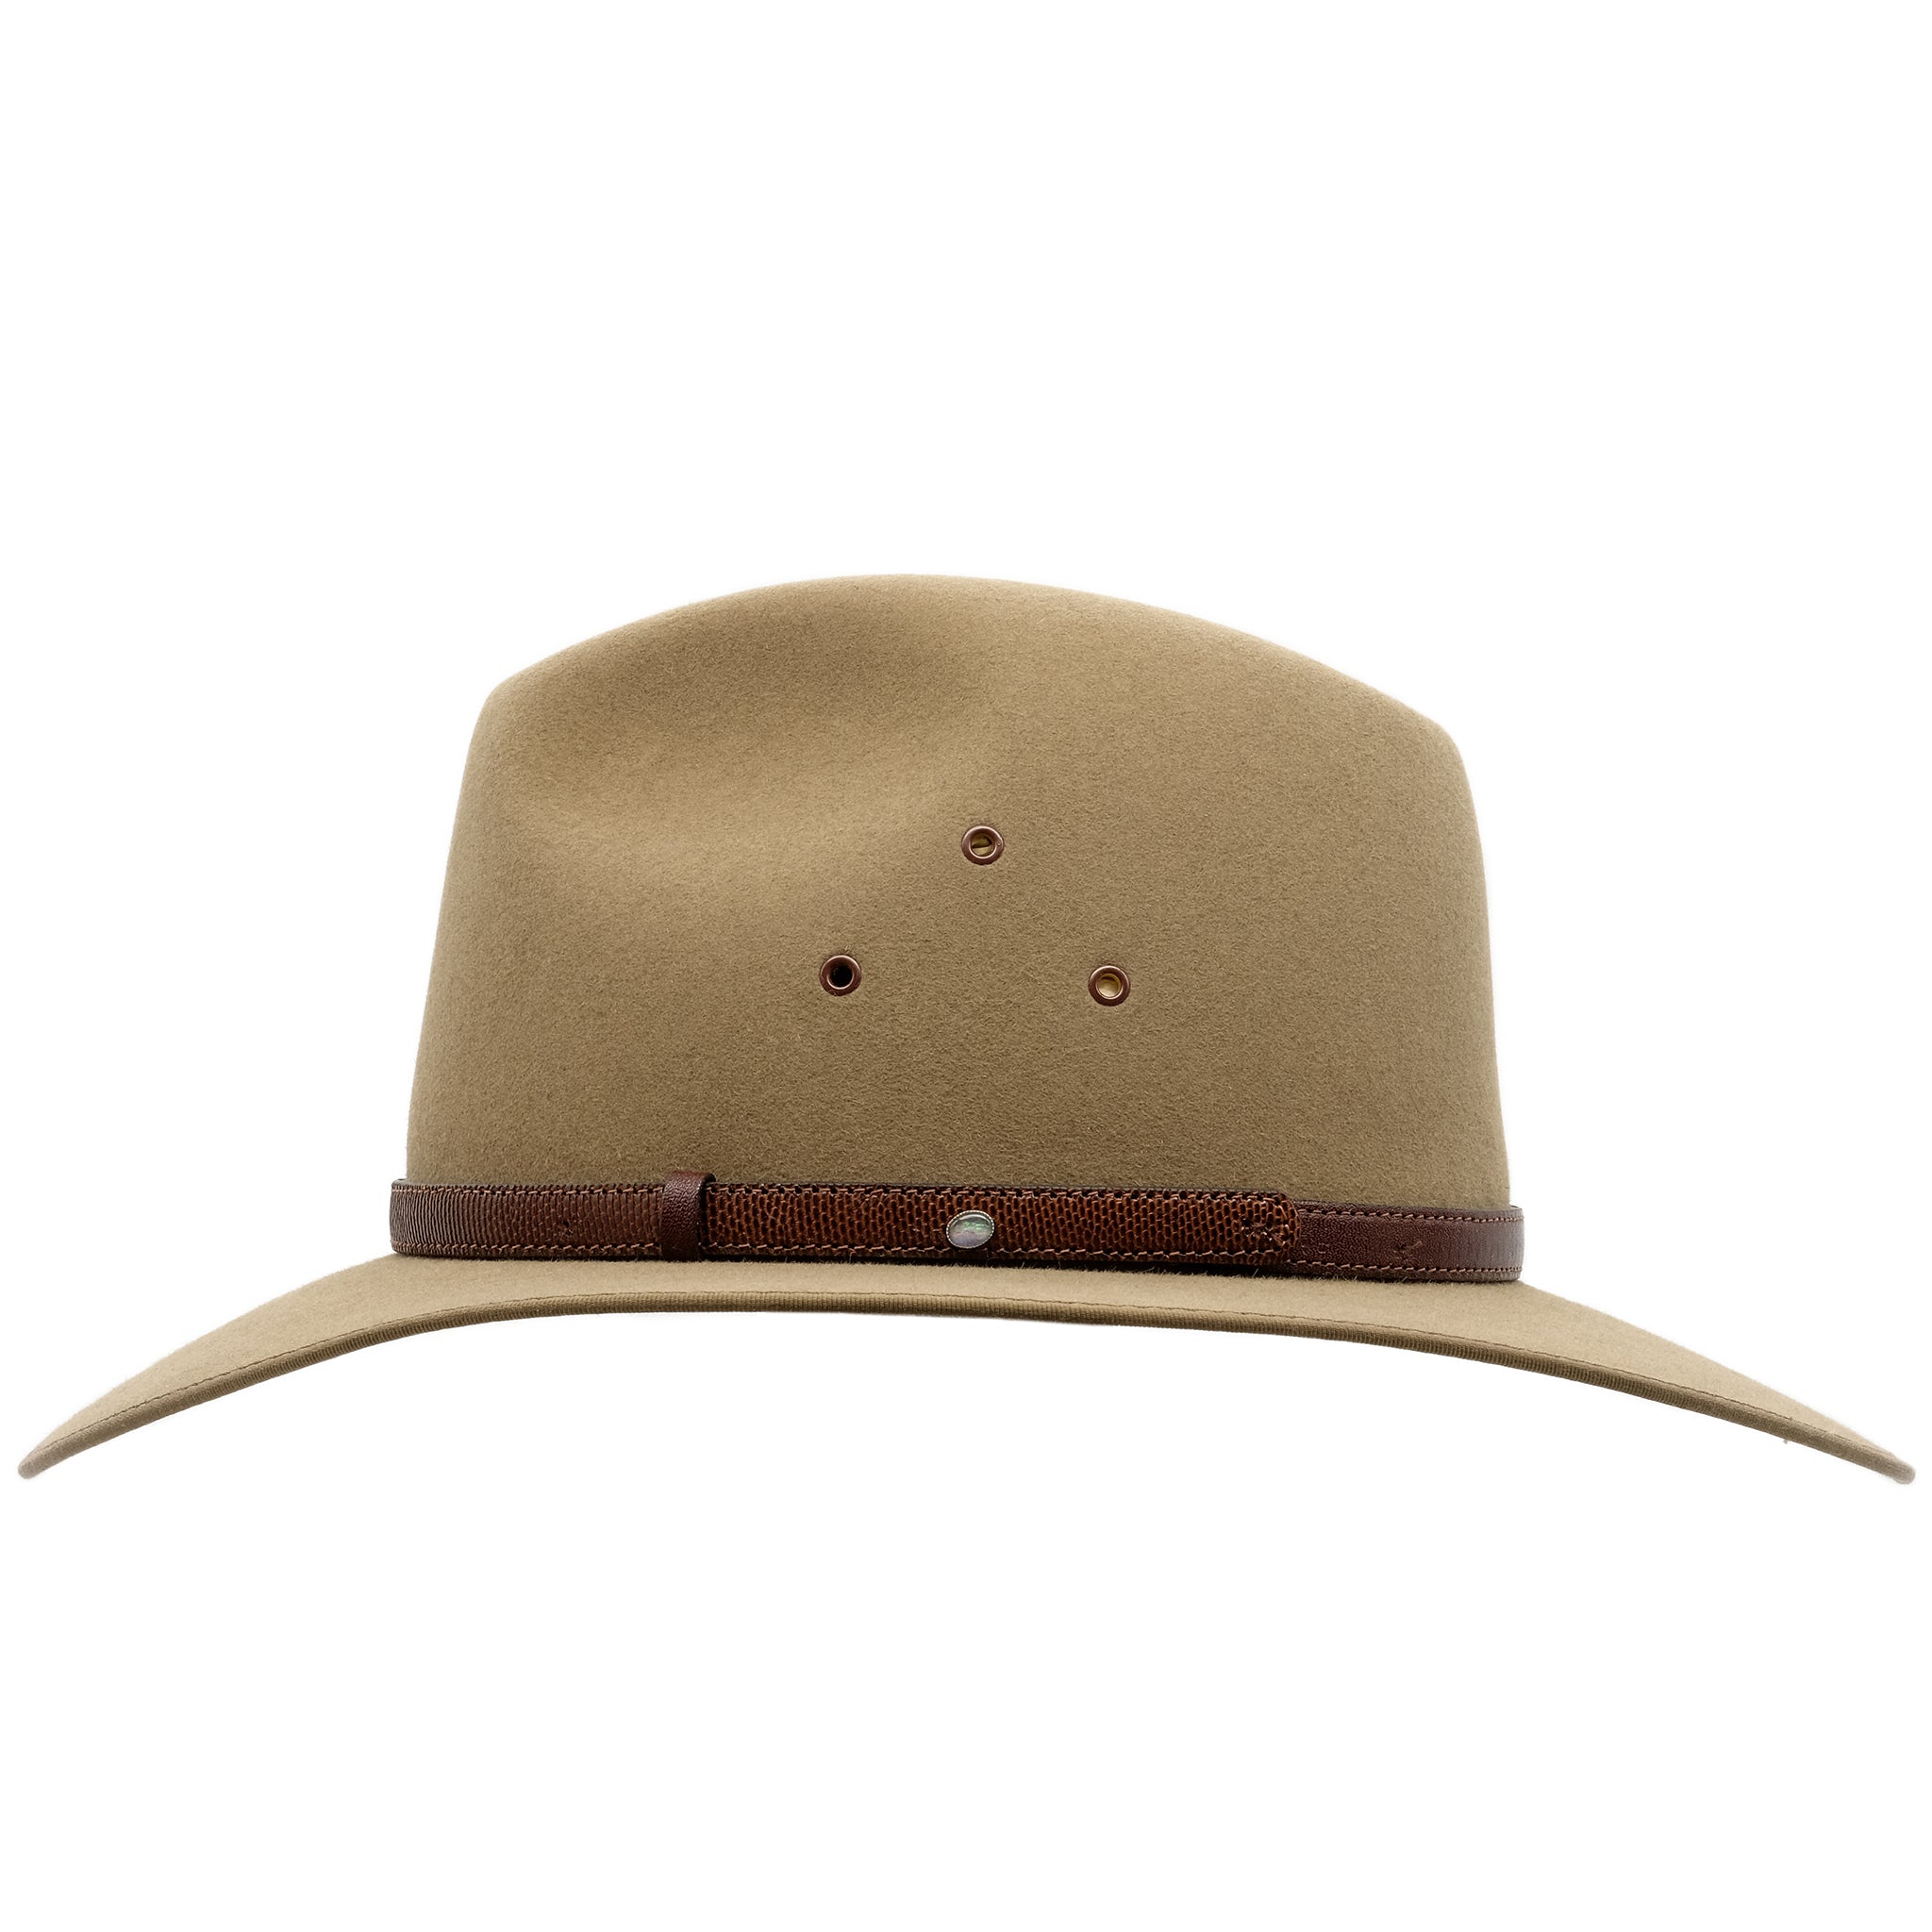 Side view of the Akubra Coober Pedy hat in Santone colour